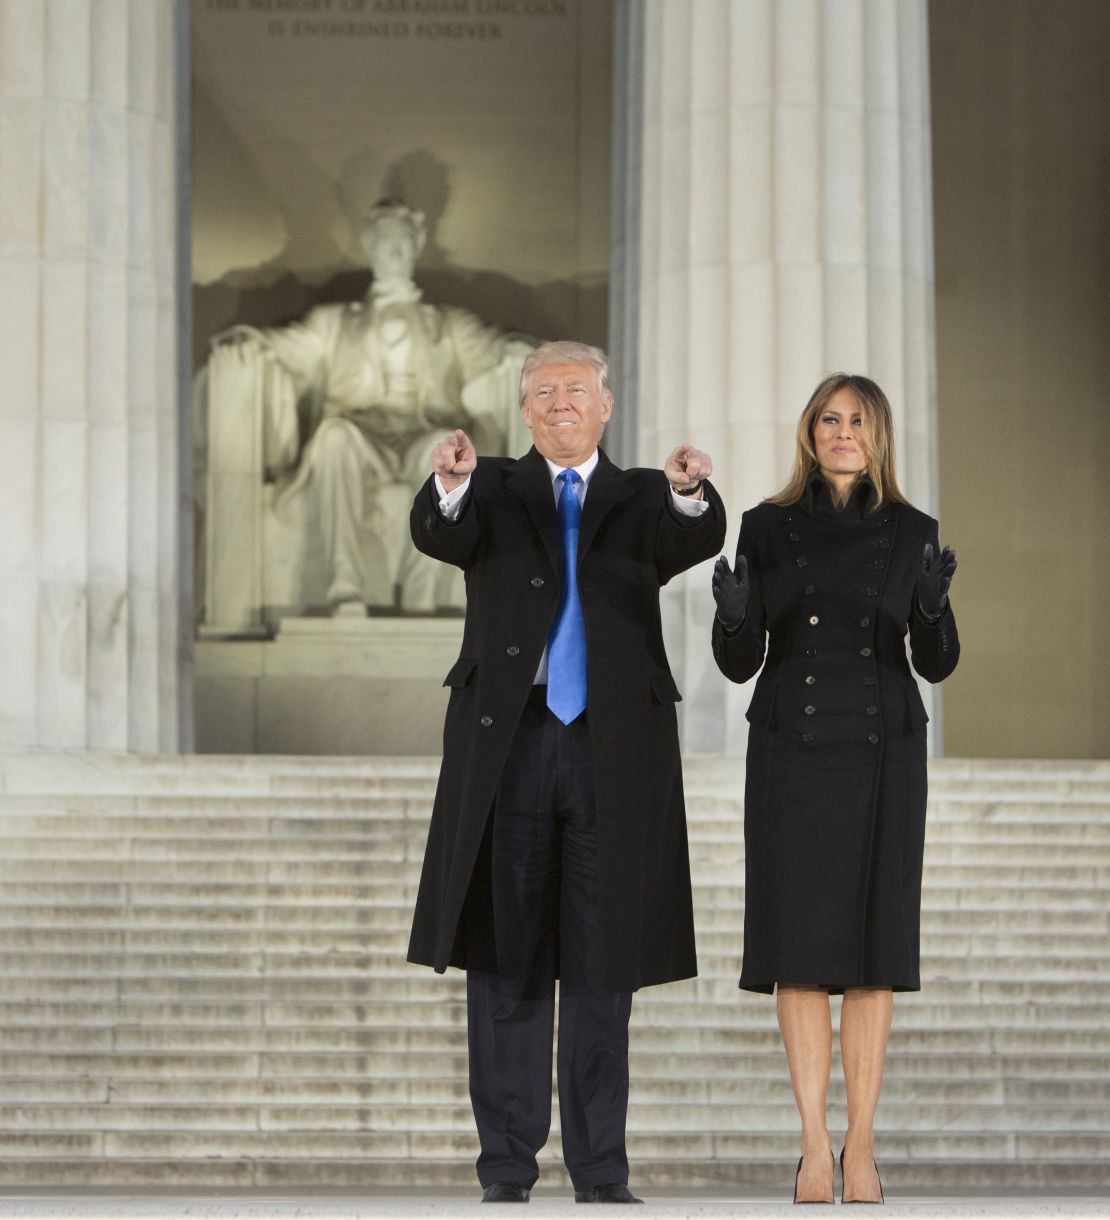 Donald Trump and wife Melania arrive for the inaugural concert at the Lincoln Memorial in Washington.